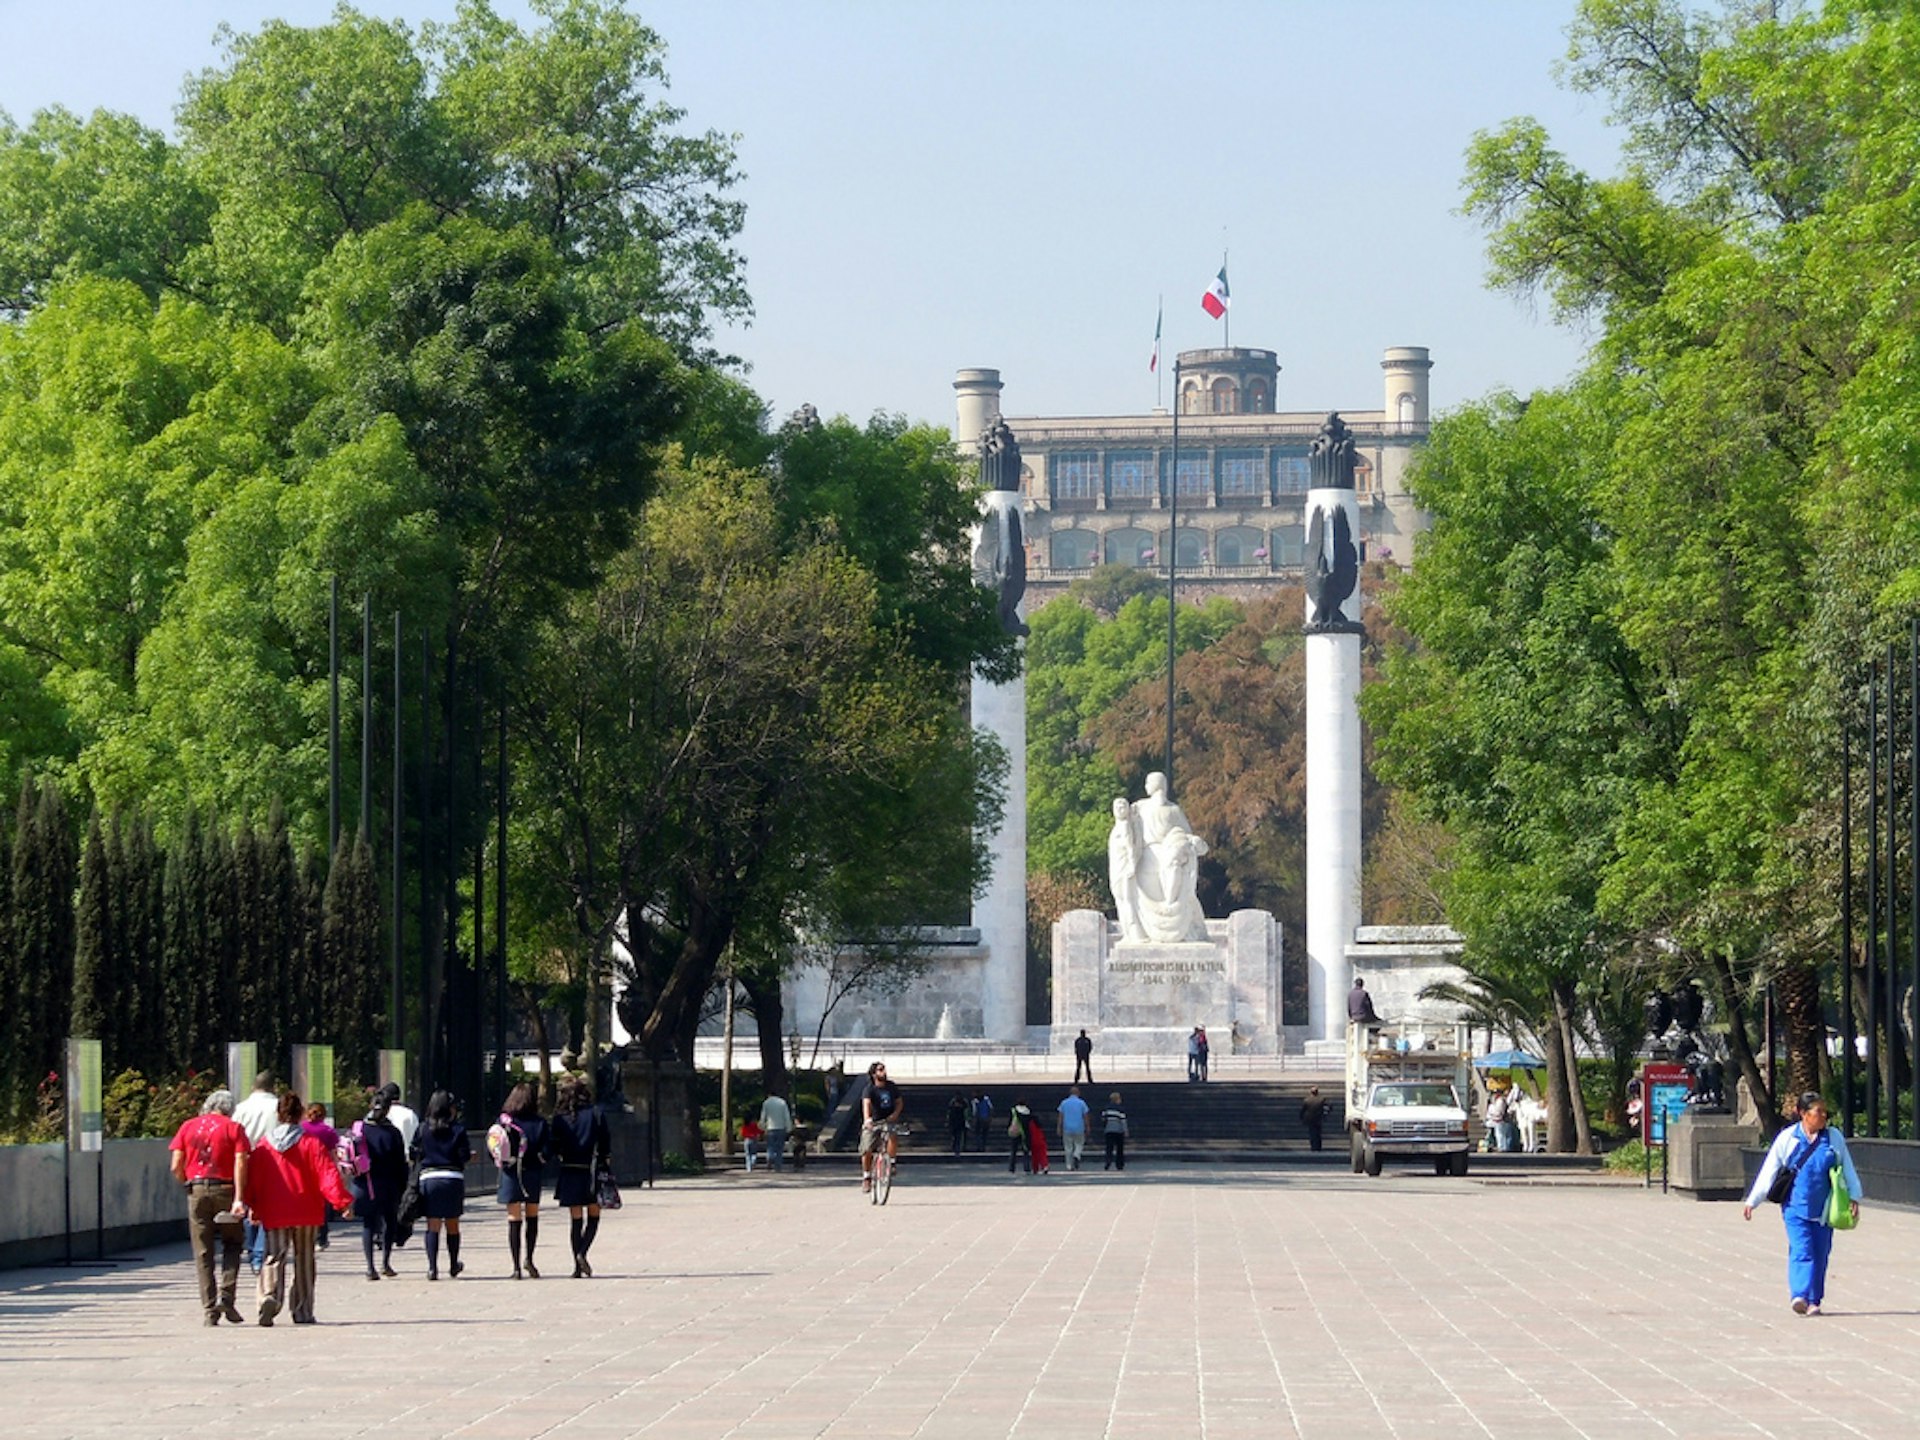 Chapultepec Castle was home to Mexico's heads of state. Image by Matthew Rutledge / CC BY 2.0